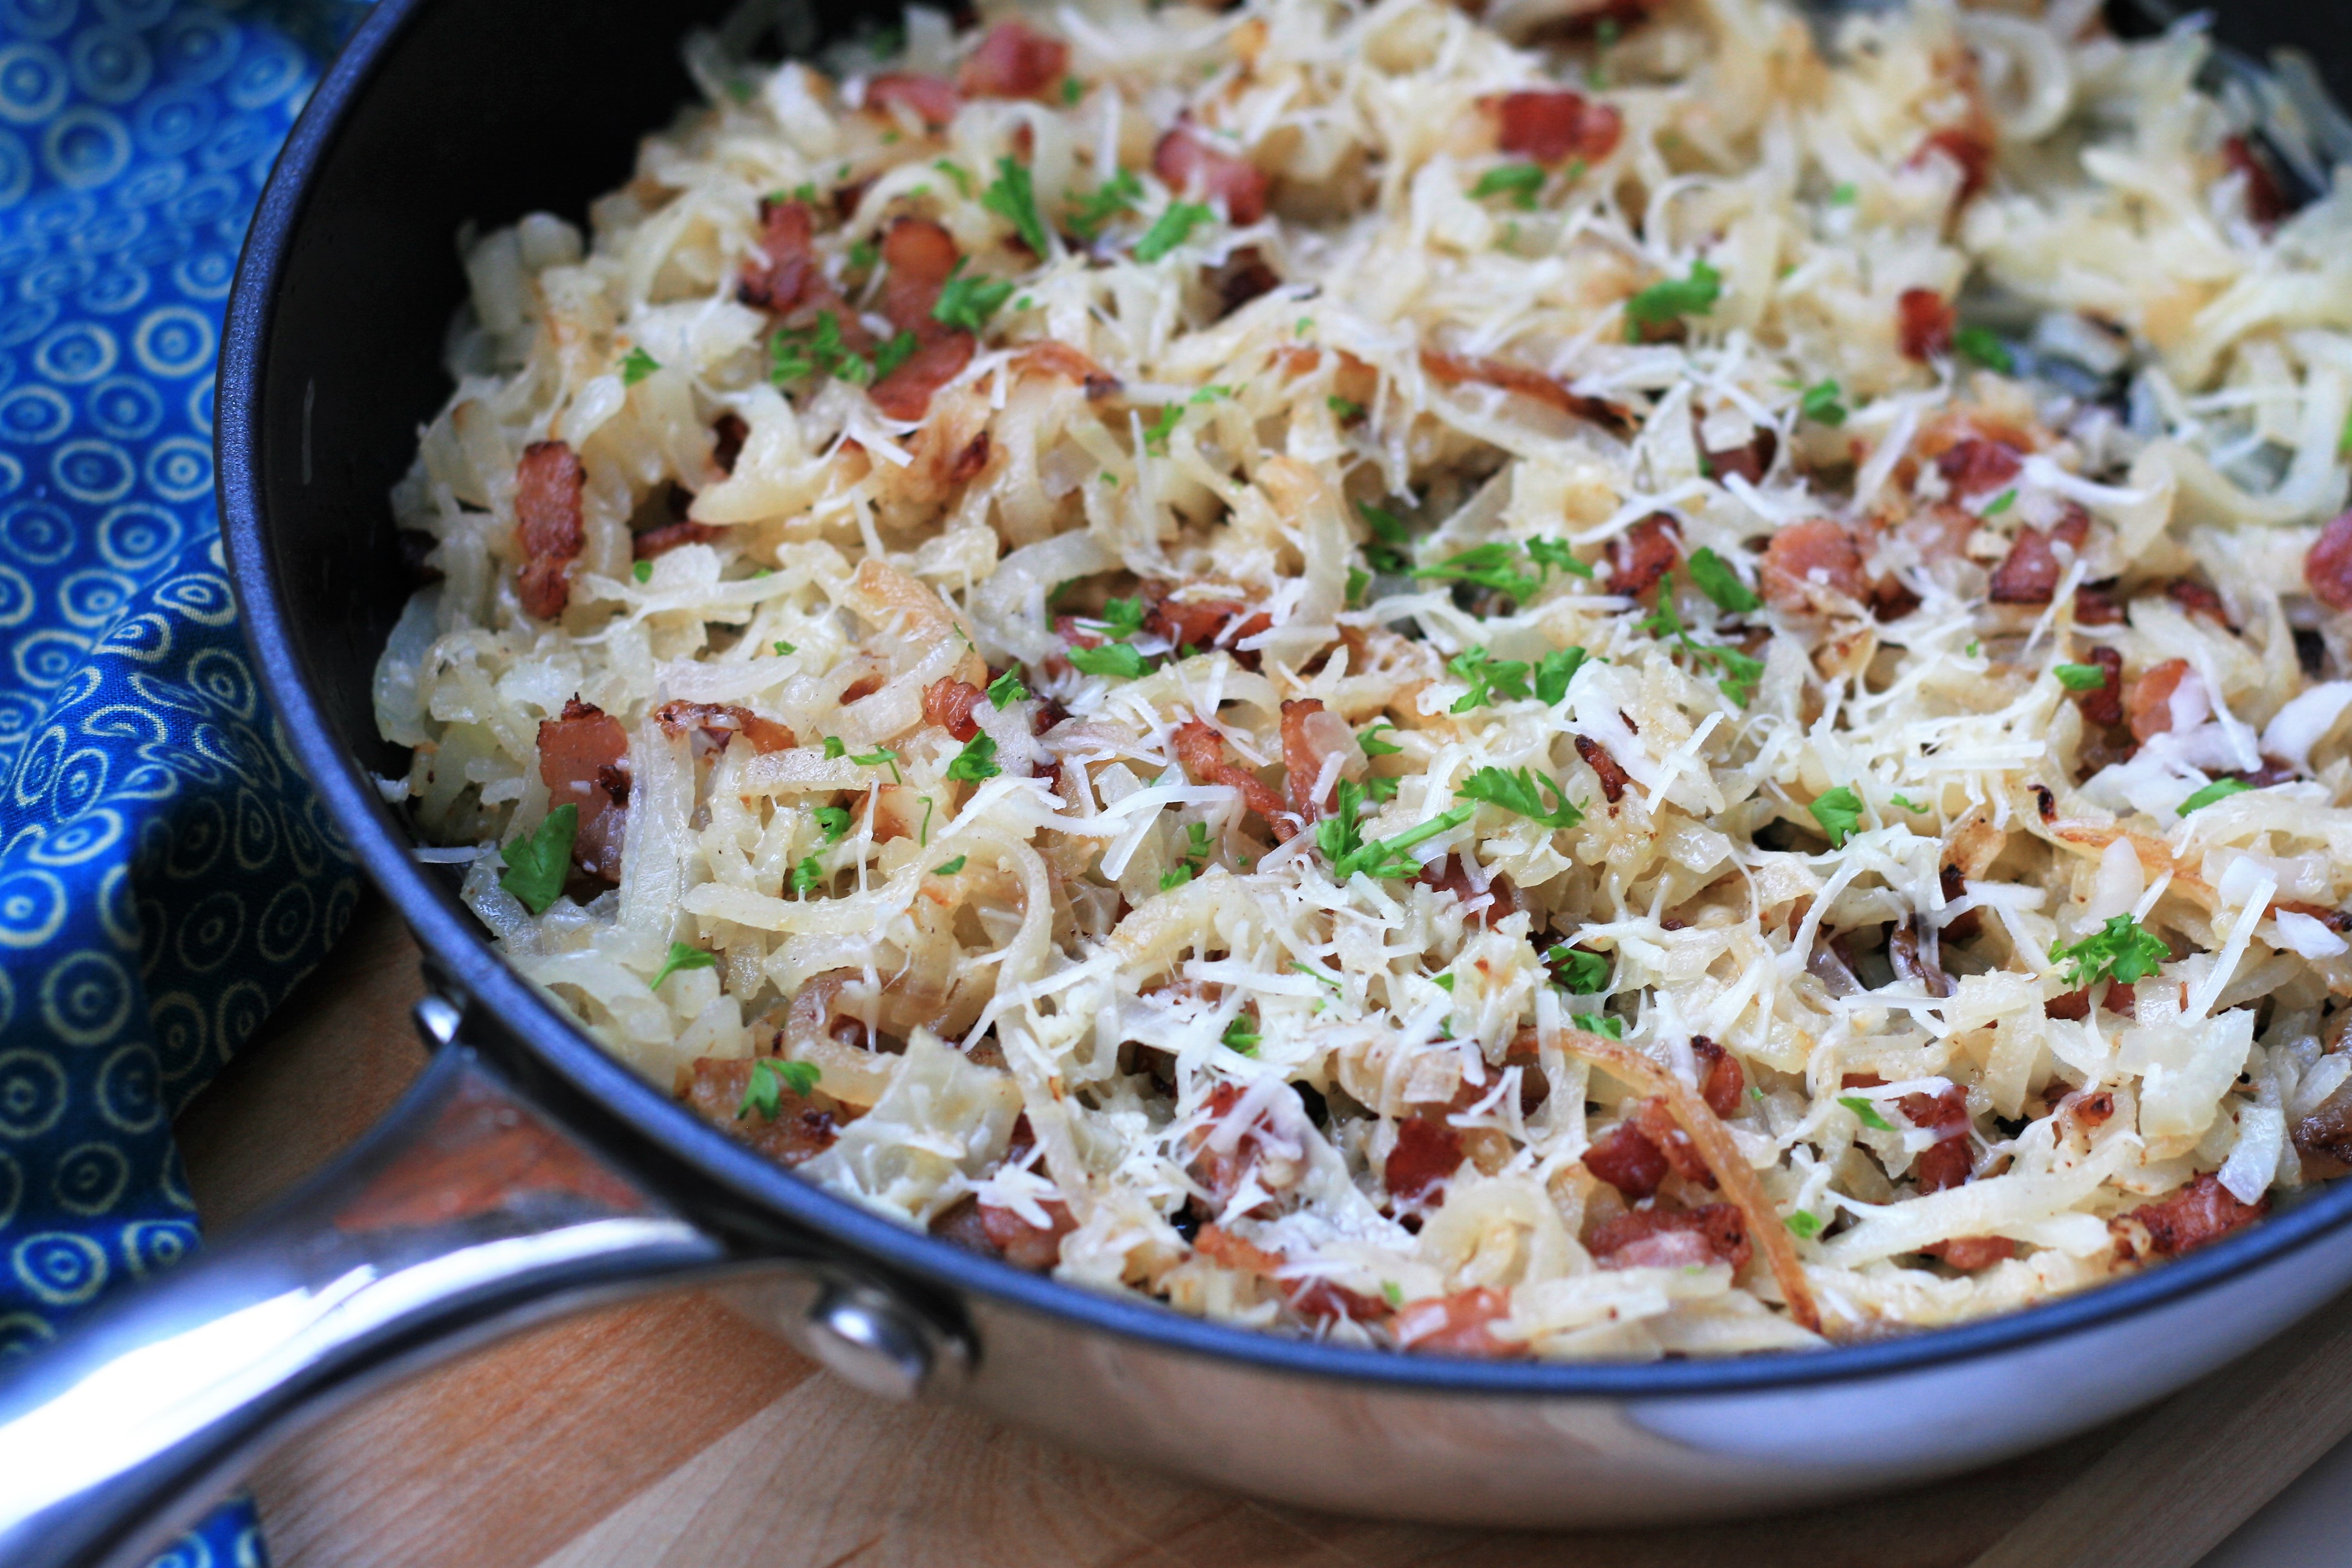 Kohlrabi Noodles with Bacon and Parmesan